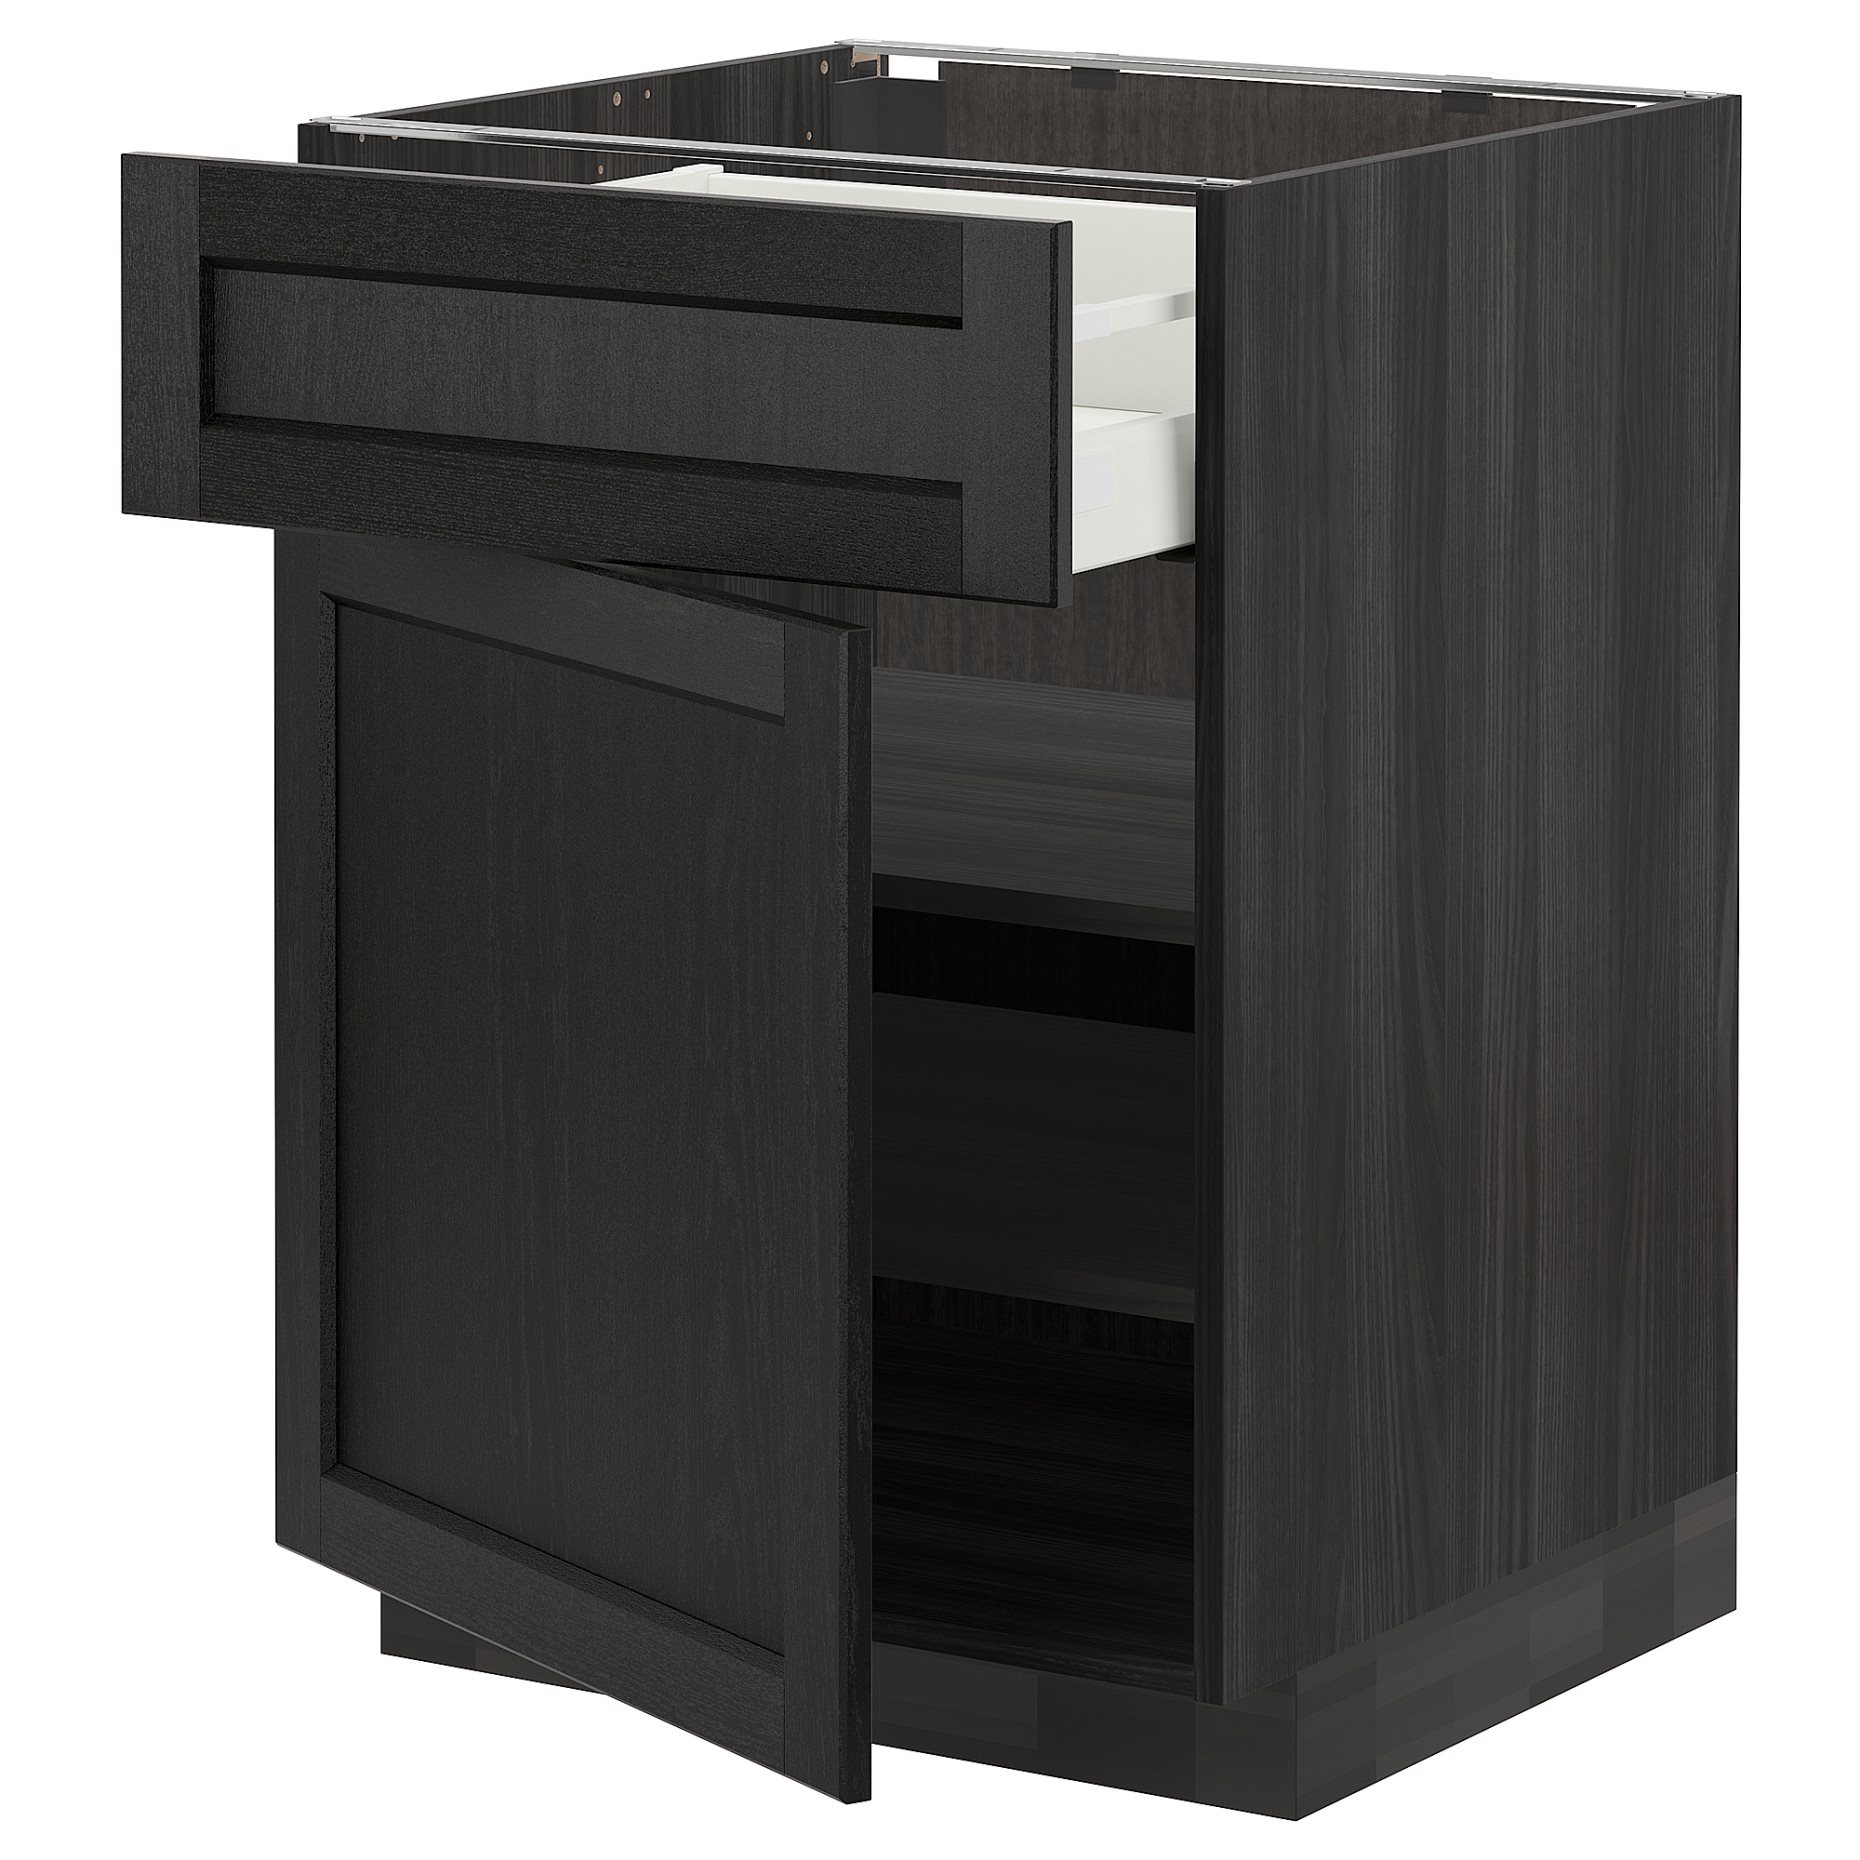 METOD/MAXIMERA, base cabinet with drawer/door, 60x60 cm, 694.623.38